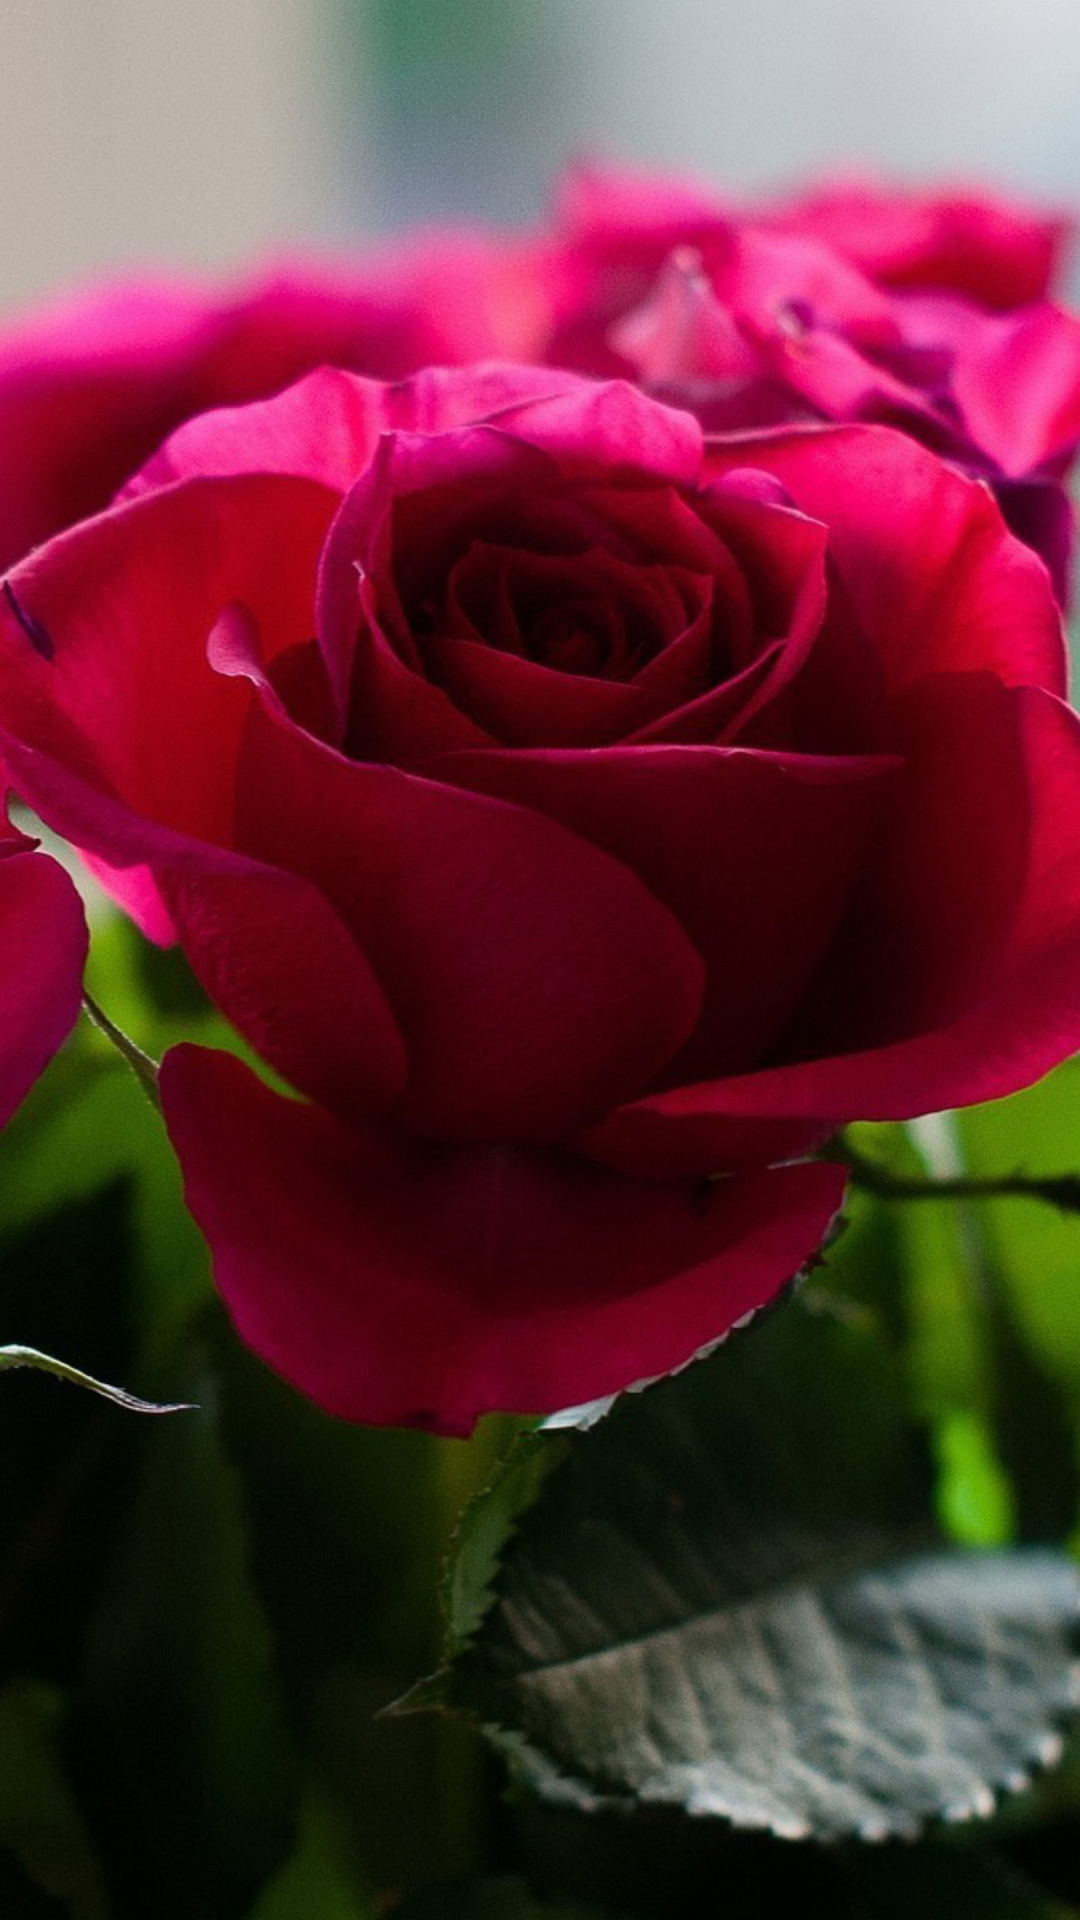 Picture of bouquet of roses from garden screenshot #1 1080x1920